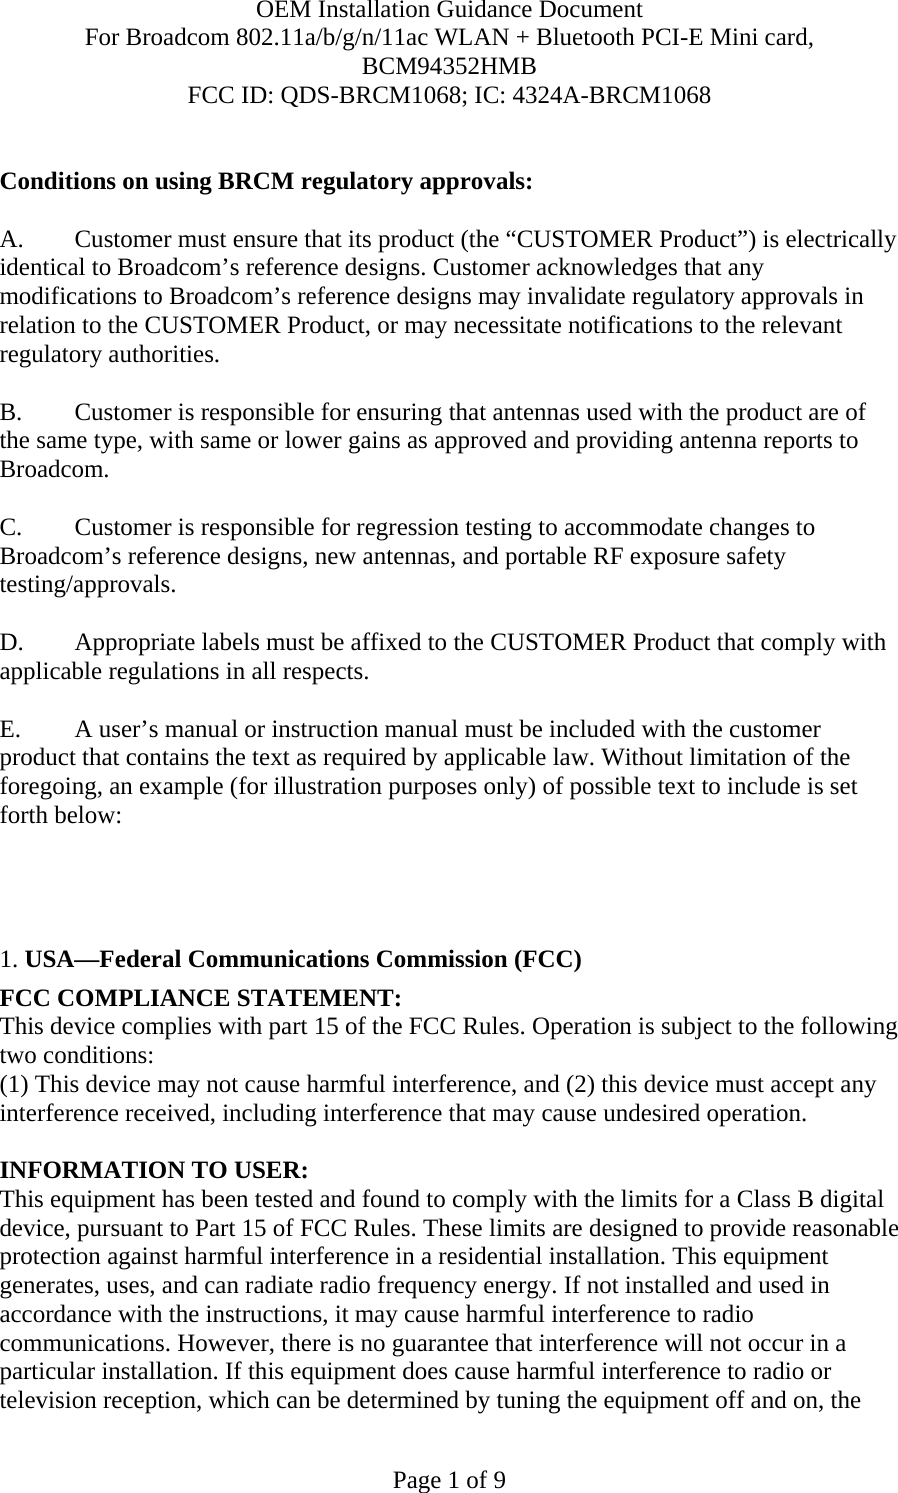 OEM Installation Guidance Document For Broadcom 802.11a/b/g/n/11ac WLAN + Bluetooth PCI-E Mini card, BCM94352HMB FCC ID: QDS-BRCM1068; IC: 4324A-BRCM1068  Page 1 of 9  Conditions on using BRCM regulatory approvals:   A.  Customer must ensure that its product (the “CUSTOMER Product”) is electrically identical to Broadcom’s reference designs. Customer acknowledges that any modifications to Broadcom’s reference designs may invalidate regulatory approvals in relation to the CUSTOMER Product, or may necessitate notifications to the relevant regulatory authorities.  B.   Customer is responsible for ensuring that antennas used with the product are of the same type, with same or lower gains as approved and providing antenna reports to Broadcom.  C.   Customer is responsible for regression testing to accommodate changes to Broadcom’s reference designs, new antennas, and portable RF exposure safety testing/approvals.  D.  Appropriate labels must be affixed to the CUSTOMER Product that comply with applicable regulations in all respects.    E.  A user’s manual or instruction manual must be included with the customer product that contains the text as required by applicable law. Without limitation of the foregoing, an example (for illustration purposes only) of possible text to include is set forth below:       1. USA—Federal Communications Commission (FCC) FCC COMPLIANCE STATEMENT: This device complies with part 15 of the FCC Rules. Operation is subject to the following two conditions: (1) This device may not cause harmful interference, and (2) this device must accept any interference received, including interference that may cause undesired operation.  INFORMATION TO USER: This equipment has been tested and found to comply with the limits for a Class B digital device, pursuant to Part 15 of FCC Rules. These limits are designed to provide reasonable protection against harmful interference in a residential installation. This equipment generates, uses, and can radiate radio frequency energy. If not installed and used in accordance with the instructions, it may cause harmful interference to radio communications. However, there is no guarantee that interference will not occur in a particular installation. If this equipment does cause harmful interference to radio or television reception, which can be determined by tuning the equipment off and on, the 